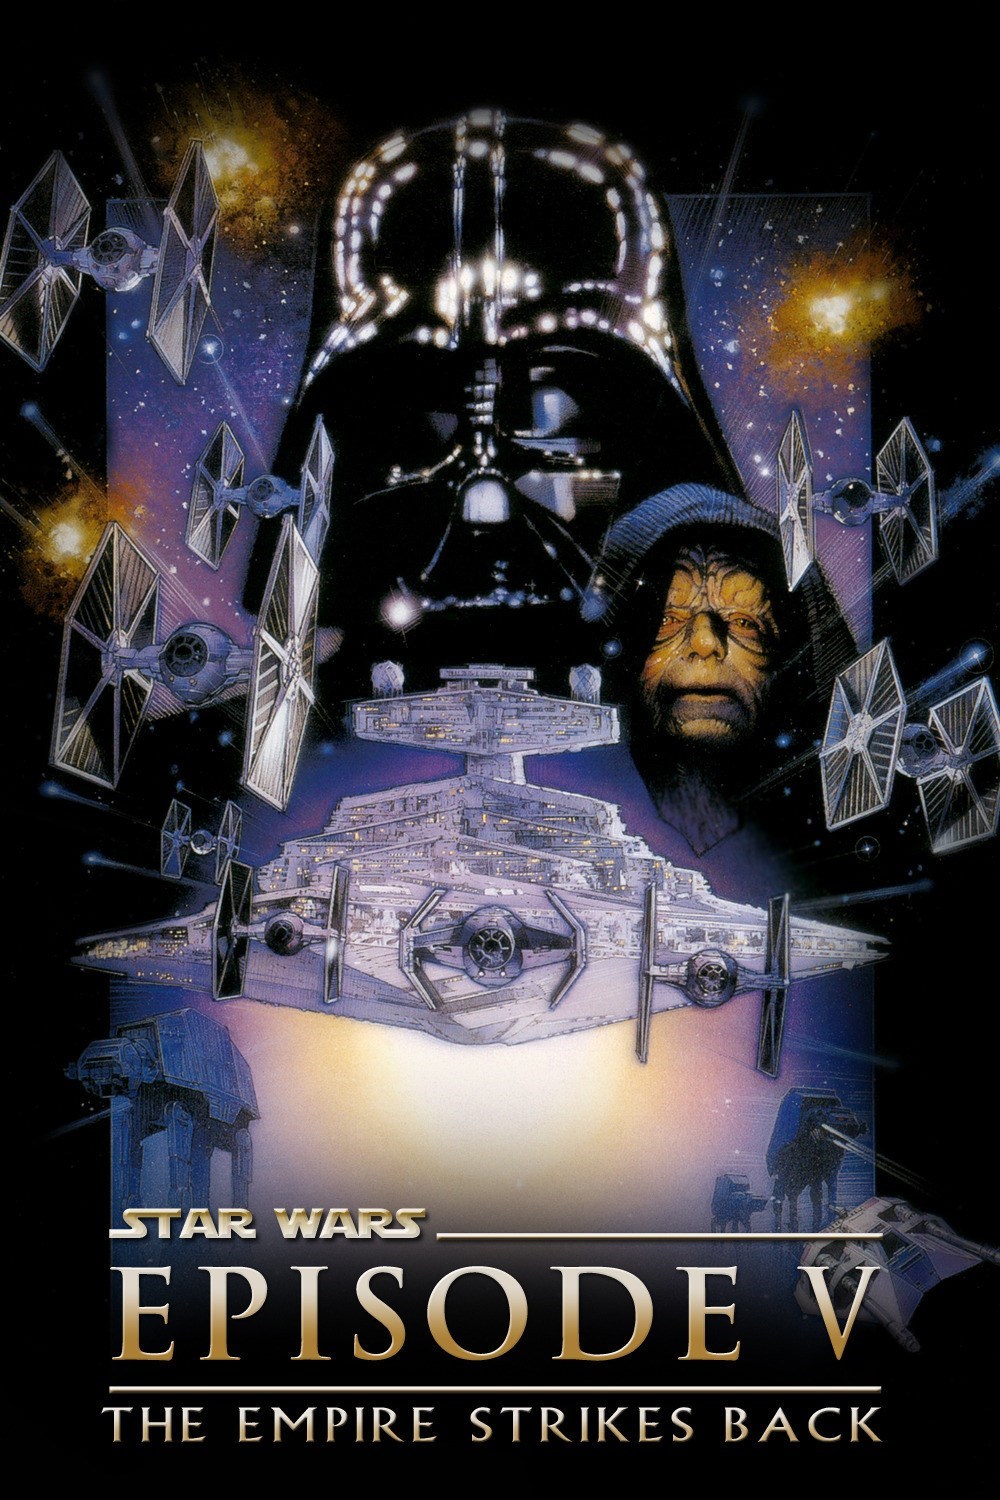 yify star wars episode 1 720p torrent